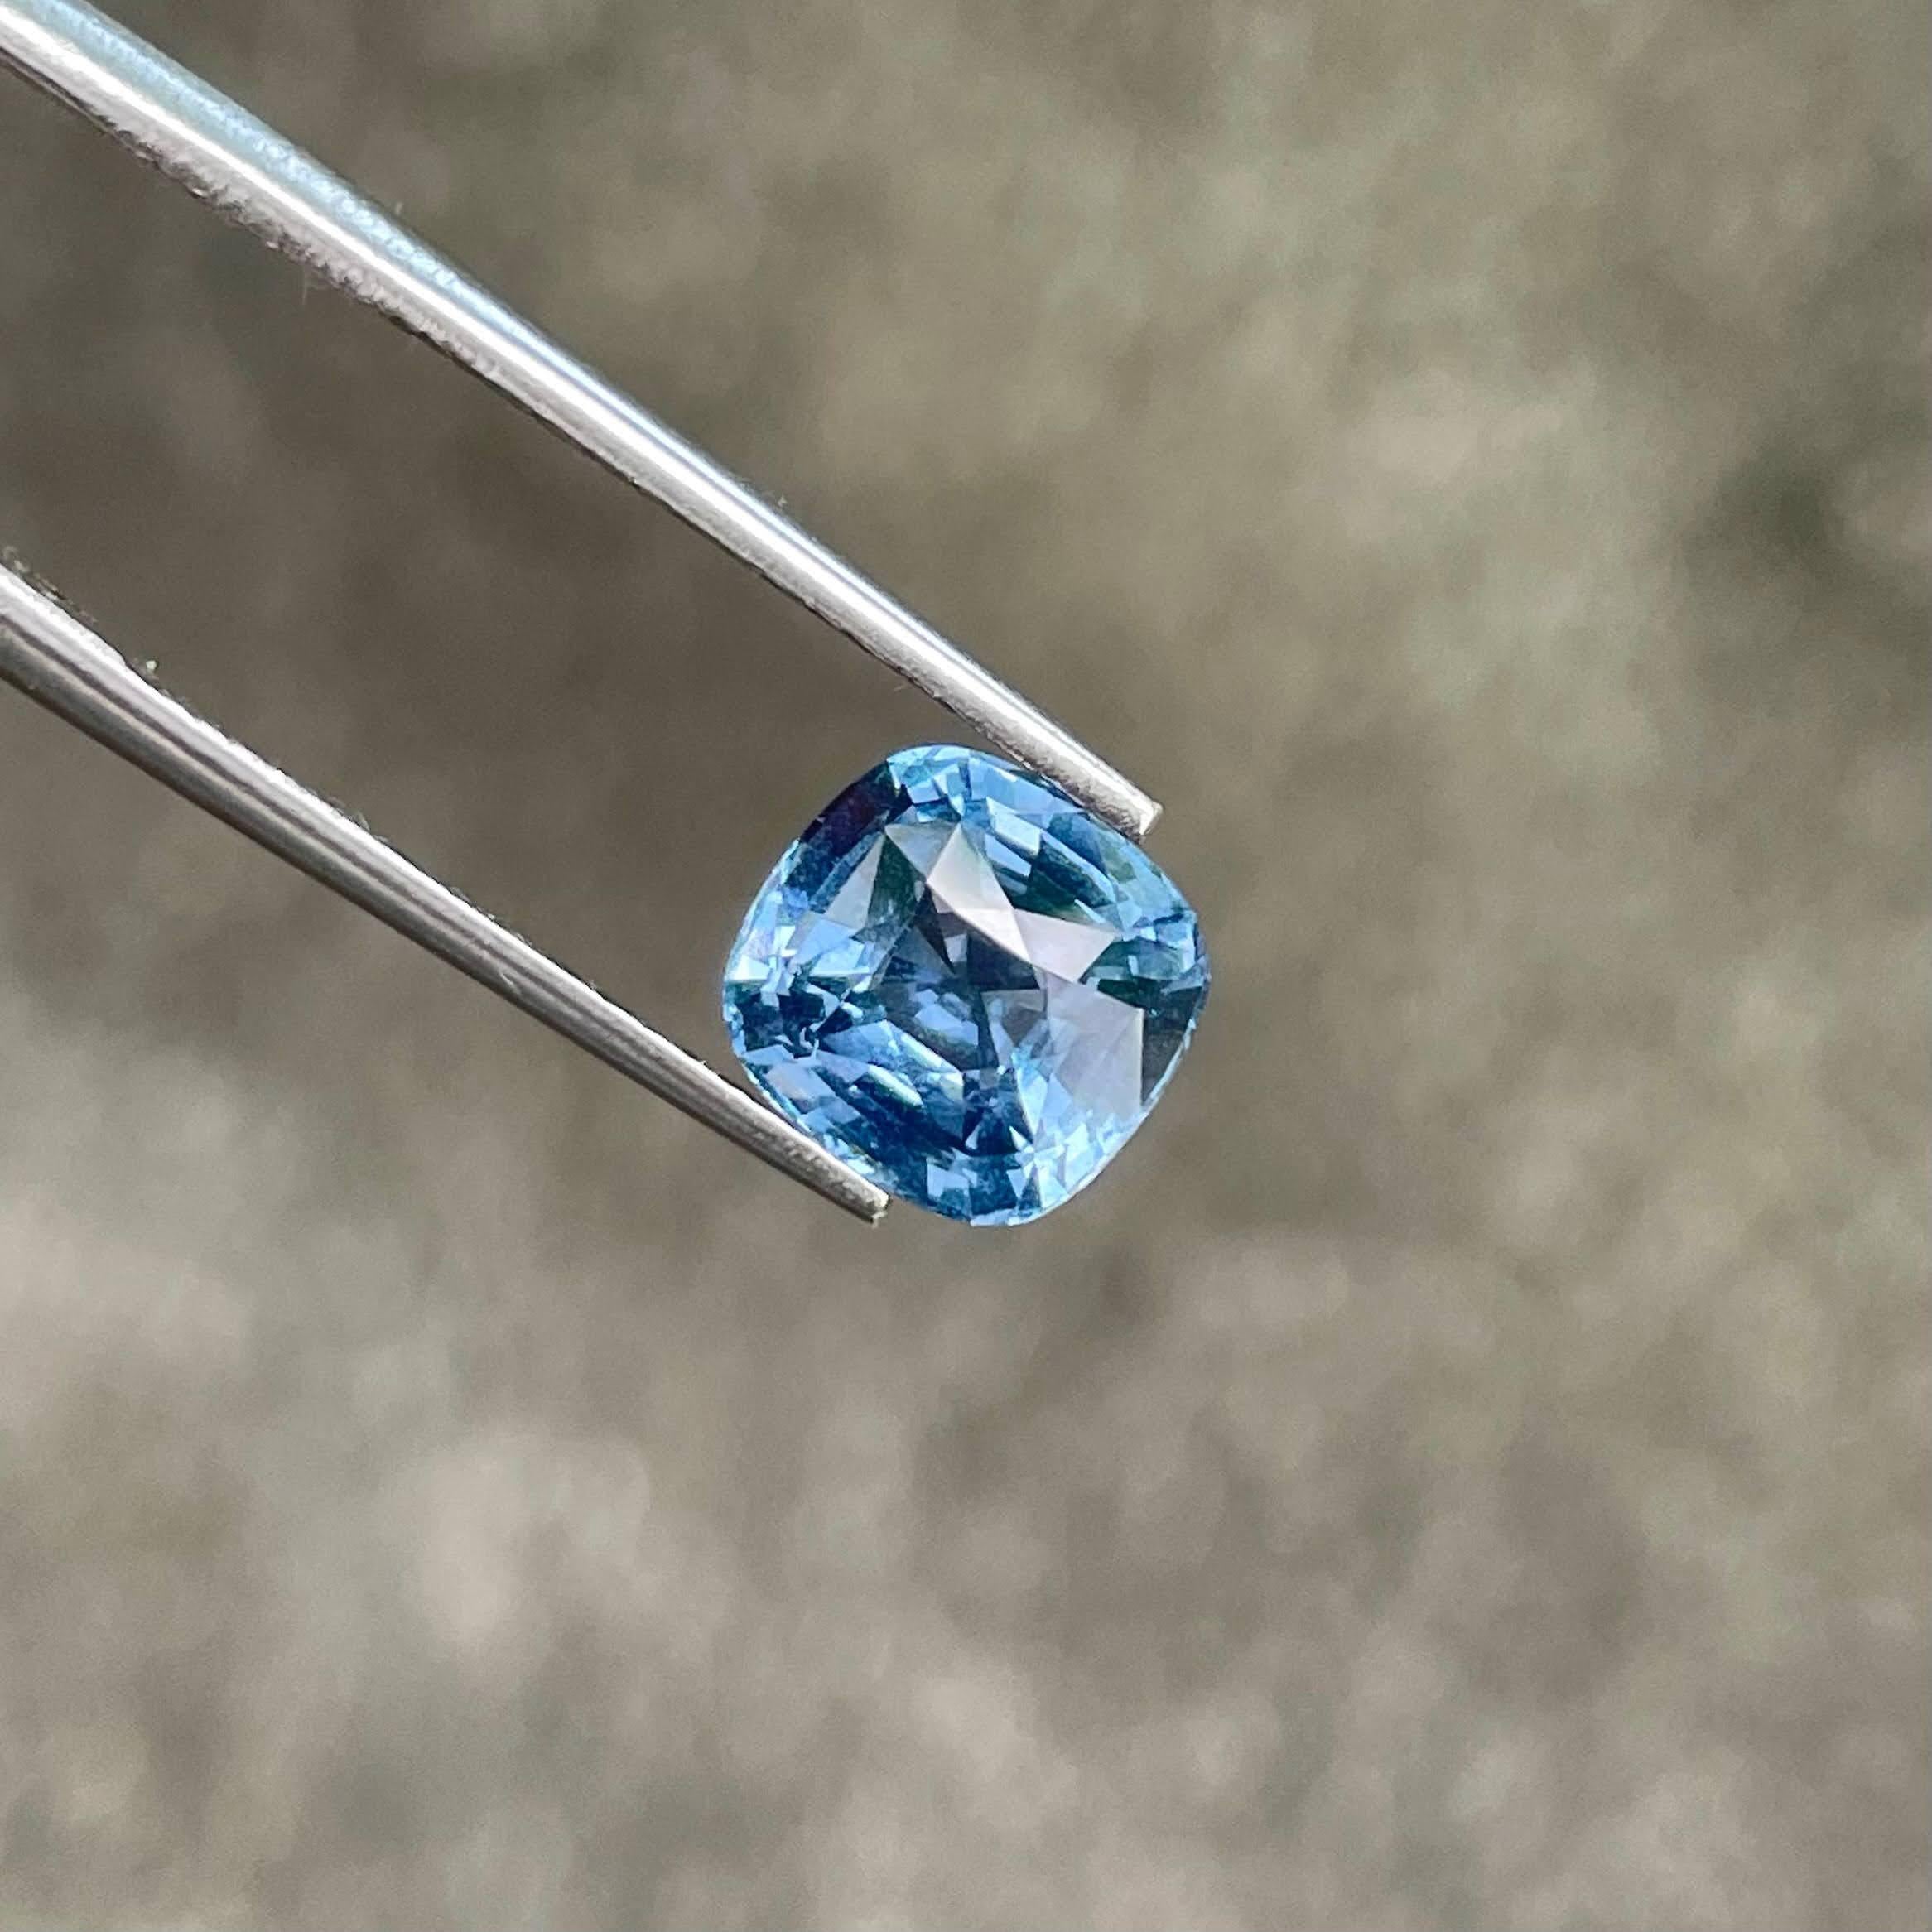 Weight 3.06 carats 
Dimensions 8.4x8.1x5.56 mm
Treatment None
Origin Afghanistan
Clarity Eye Clean
Shape Cushion
Cut Step Cushion




The Light Blue Spinel is a captivating gemstone, boasting a substantial weight of 3.06 carats and a beautifully